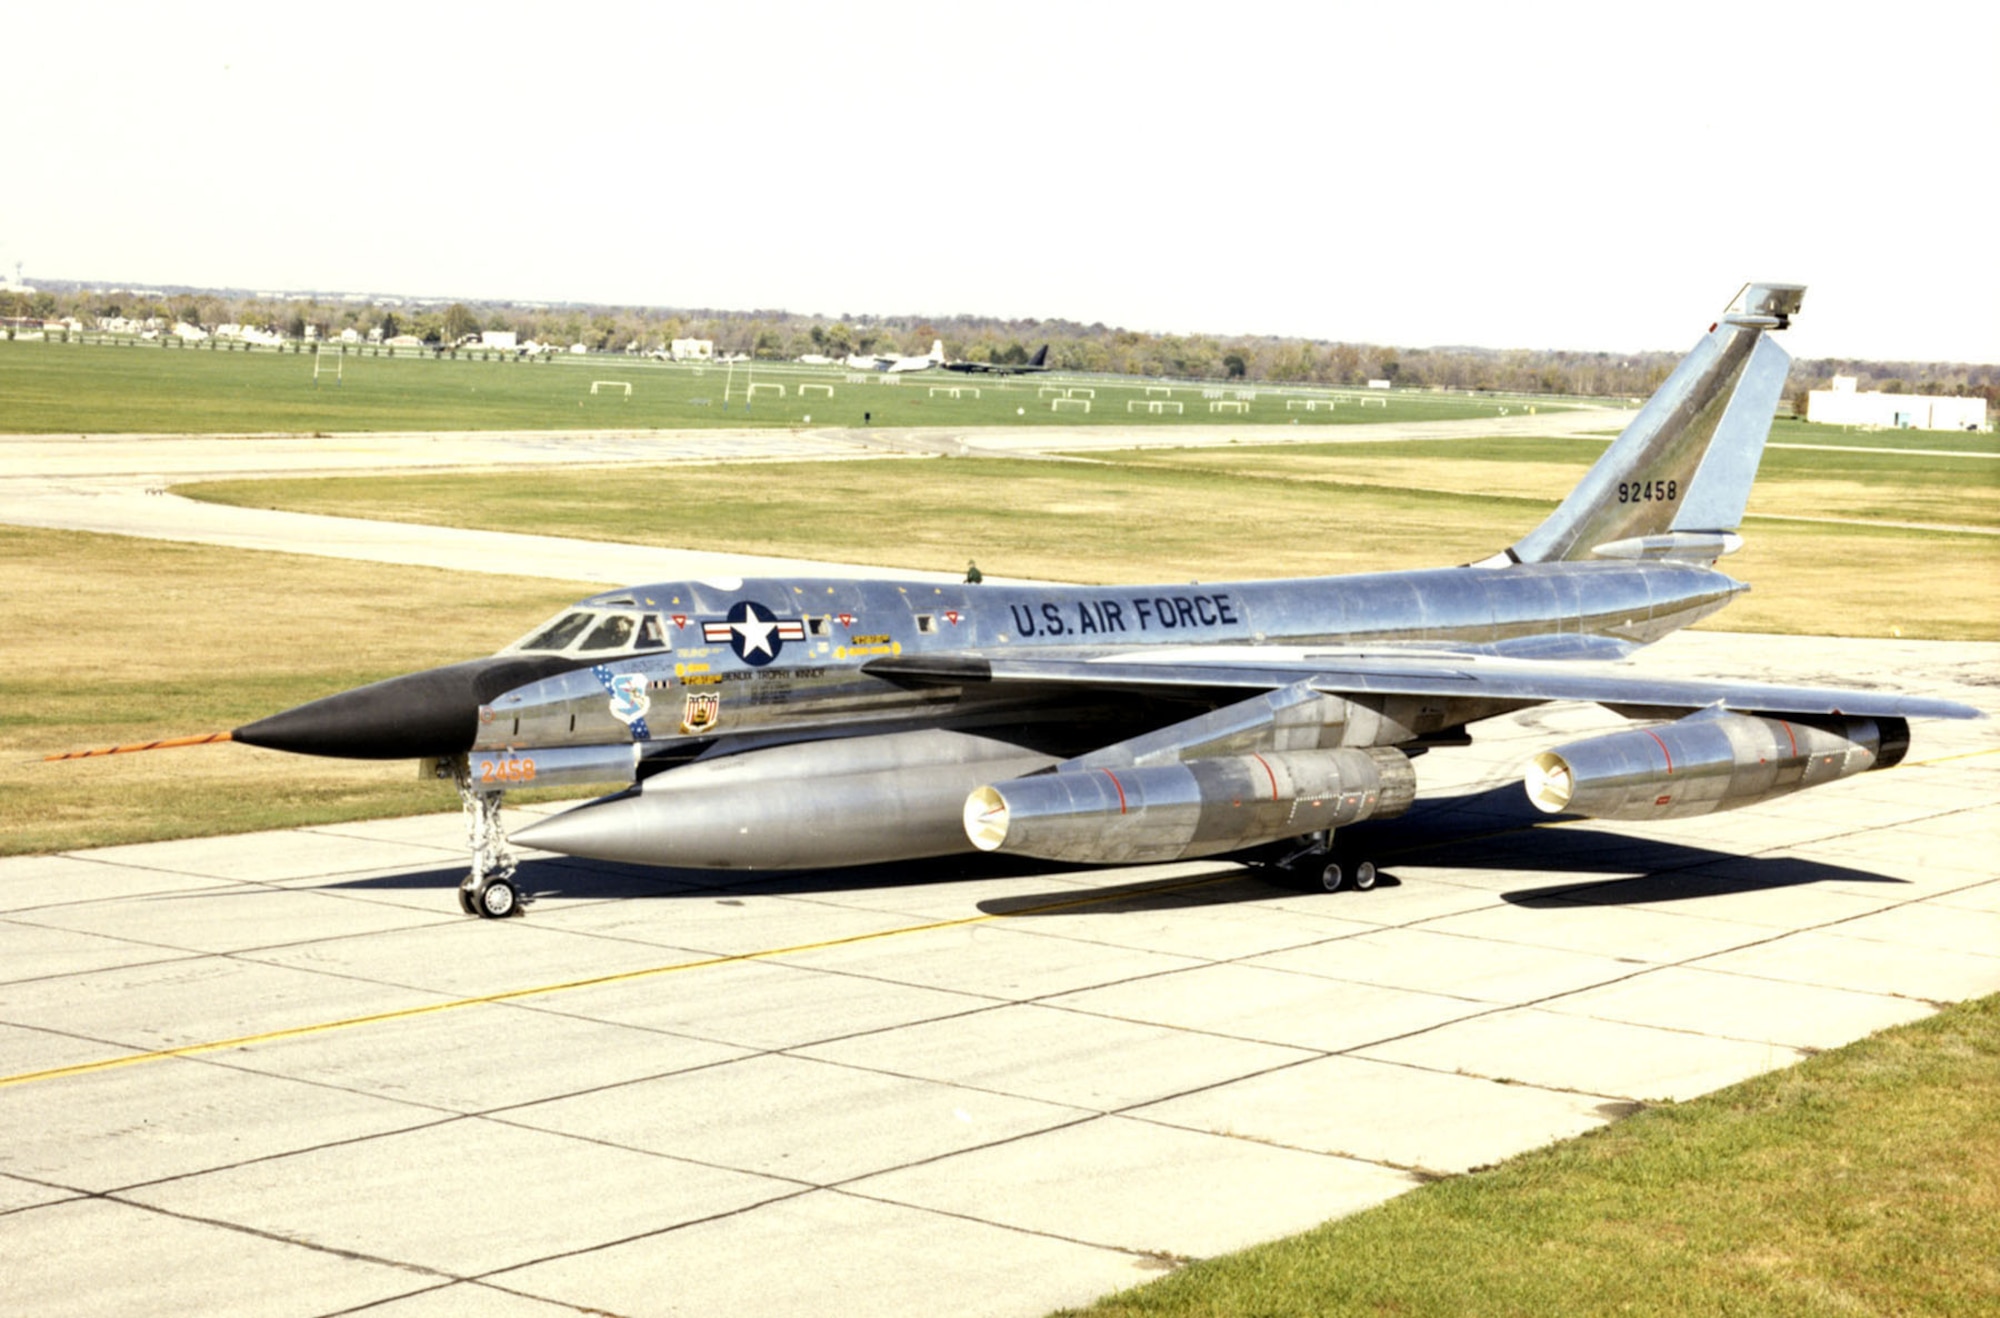 DAYTON, Ohio -- Convair B-58 Hustler at the National Museum of the United States Air Force. (U.S. Air Force photo)